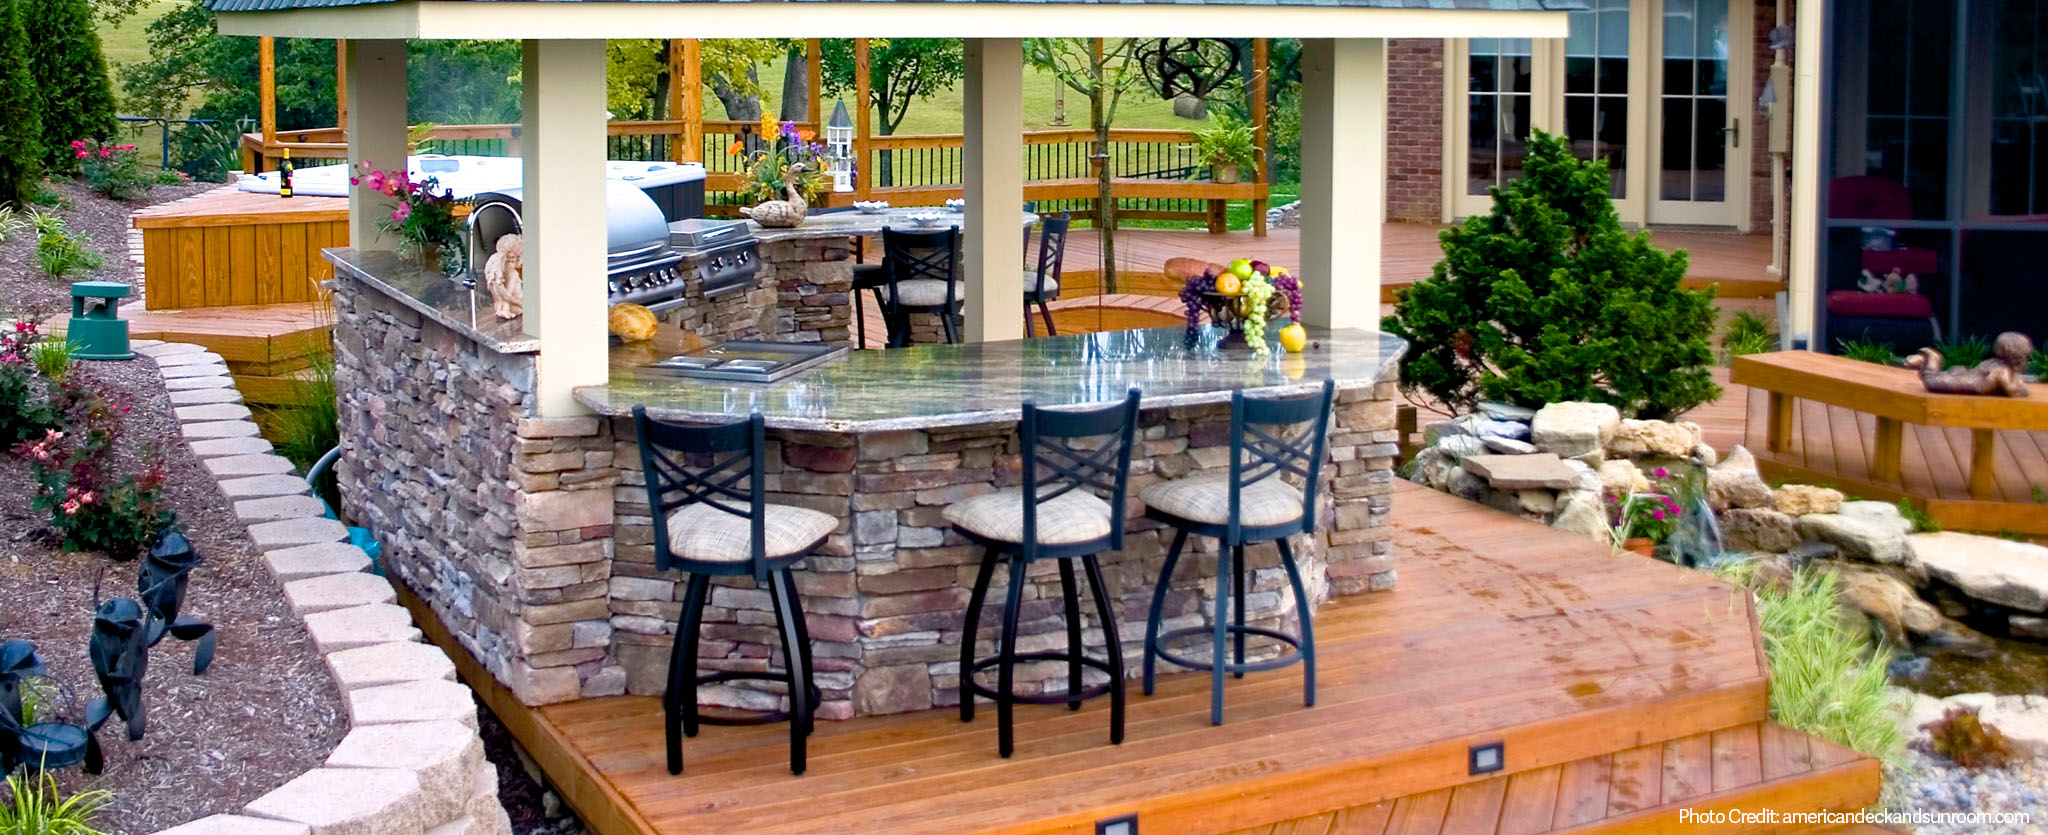 Deck Top Outdoor Kitchens - Can it be Done? - Oasis Outdoor Living